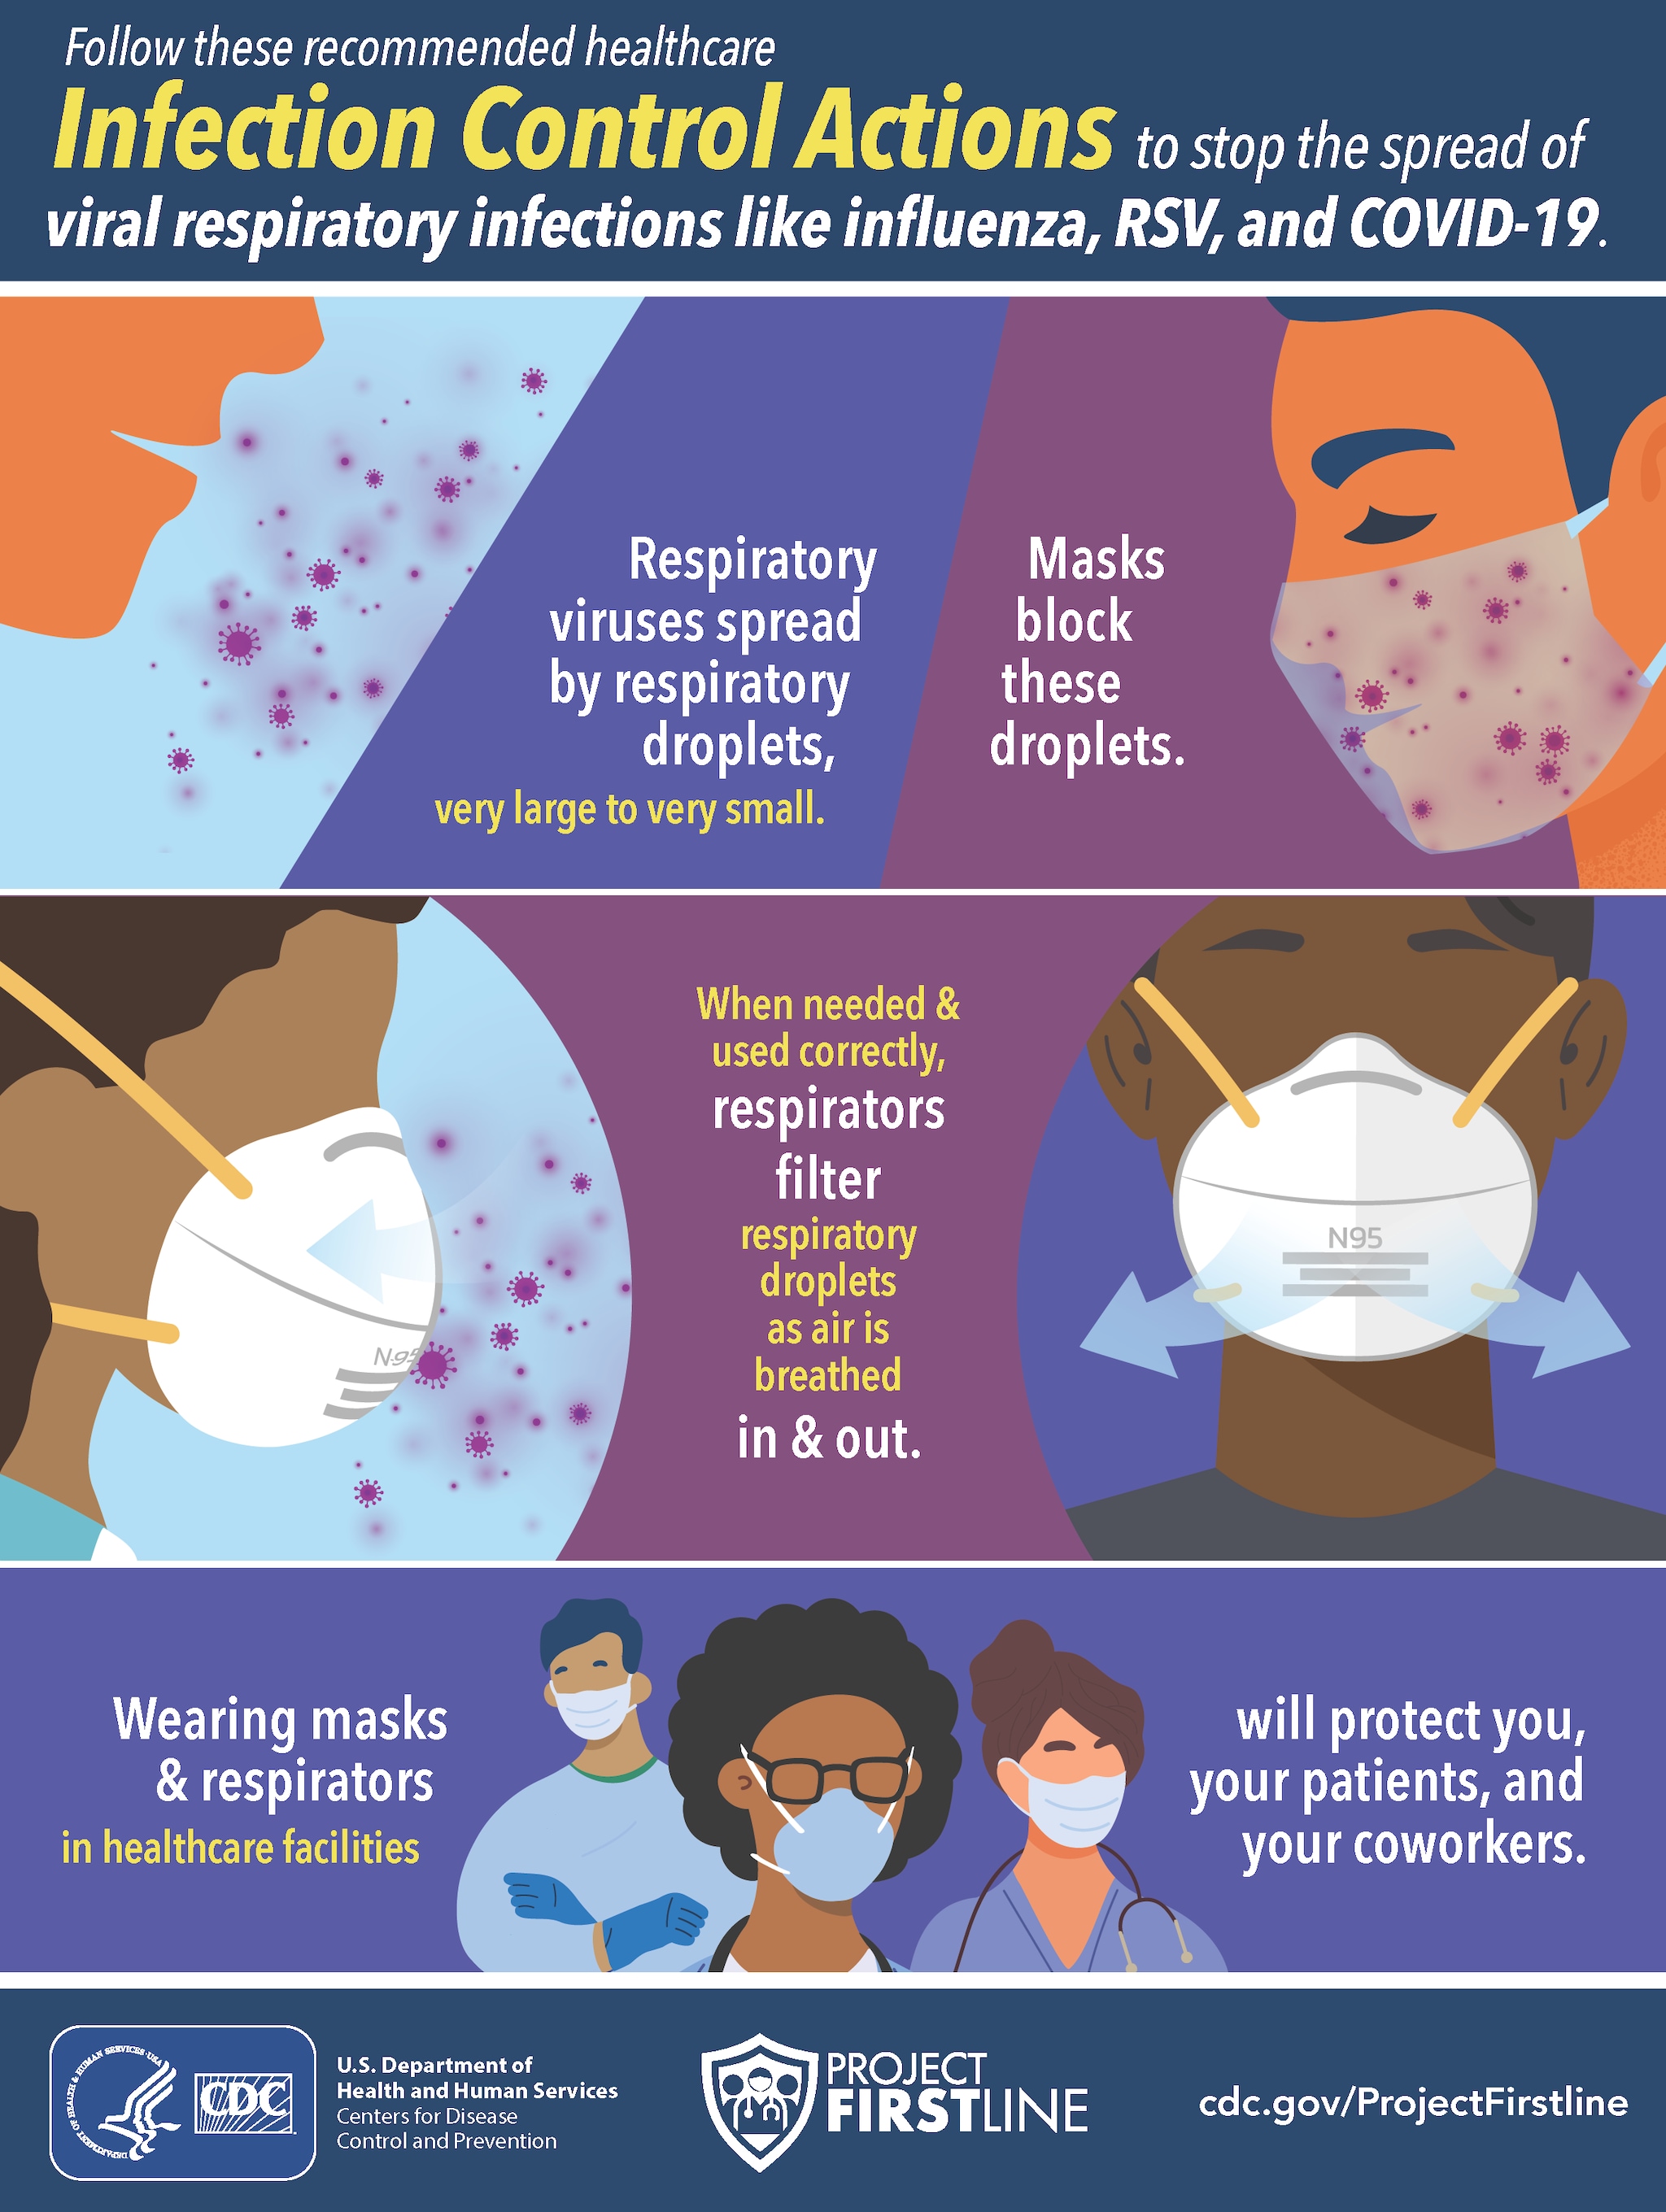 Infection Control Actions to stop the spread of viral respiratory infections like influenza, RSV, and COVID-19.